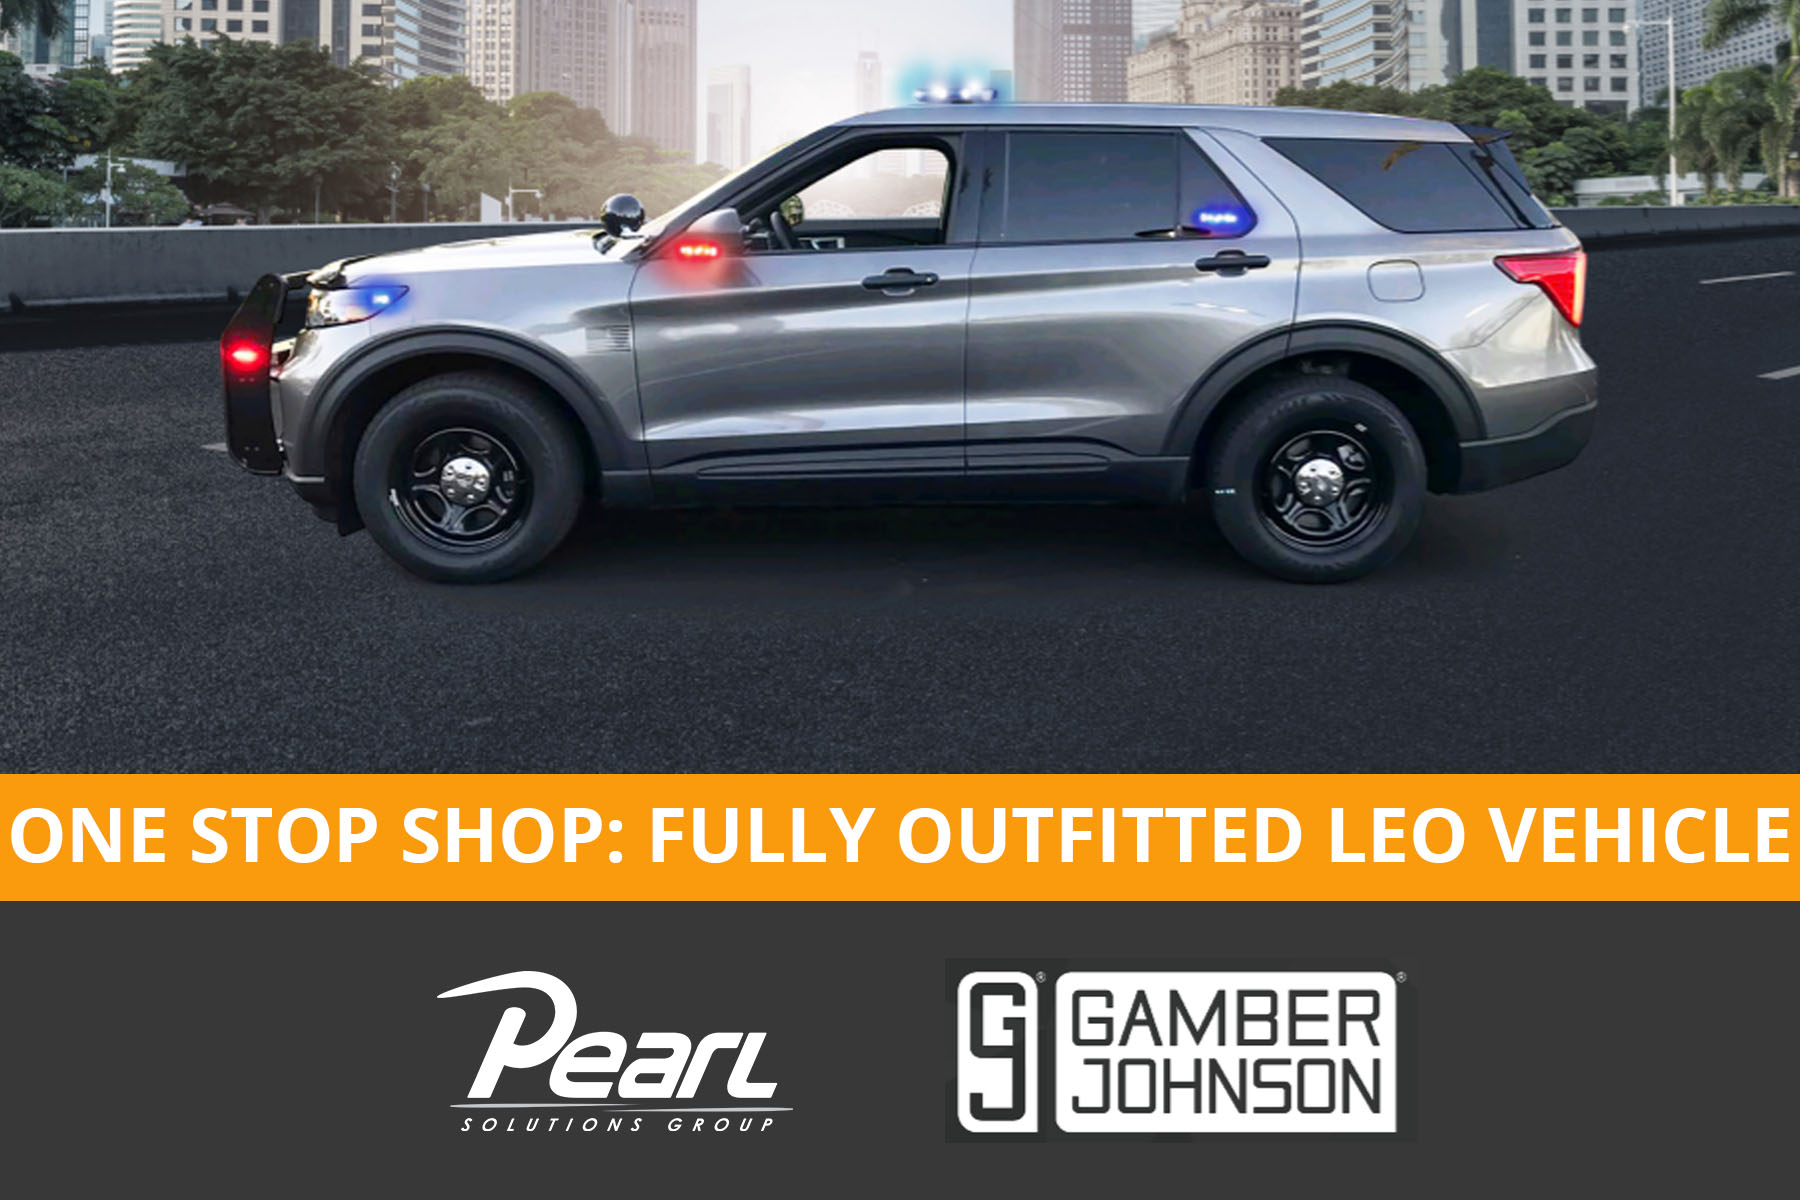 One Stop Shop Fully Outfitted LEO Vehicles